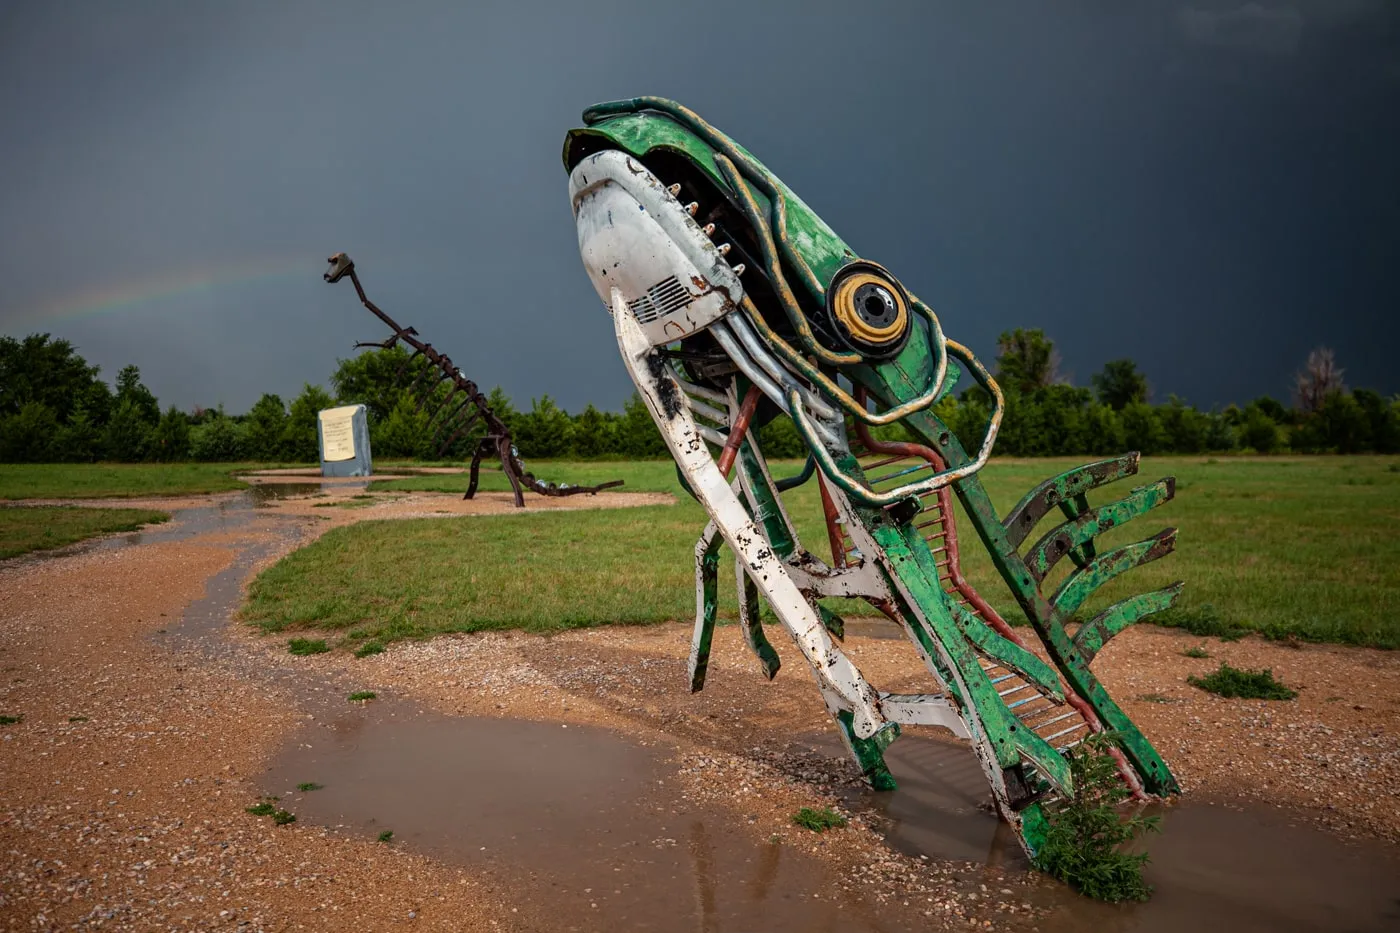 The Spawning Salmon sculpture at Carhenge Roadside Attraction in Alliance, Nebraska - Giant Fish Sculpture at Carhenge